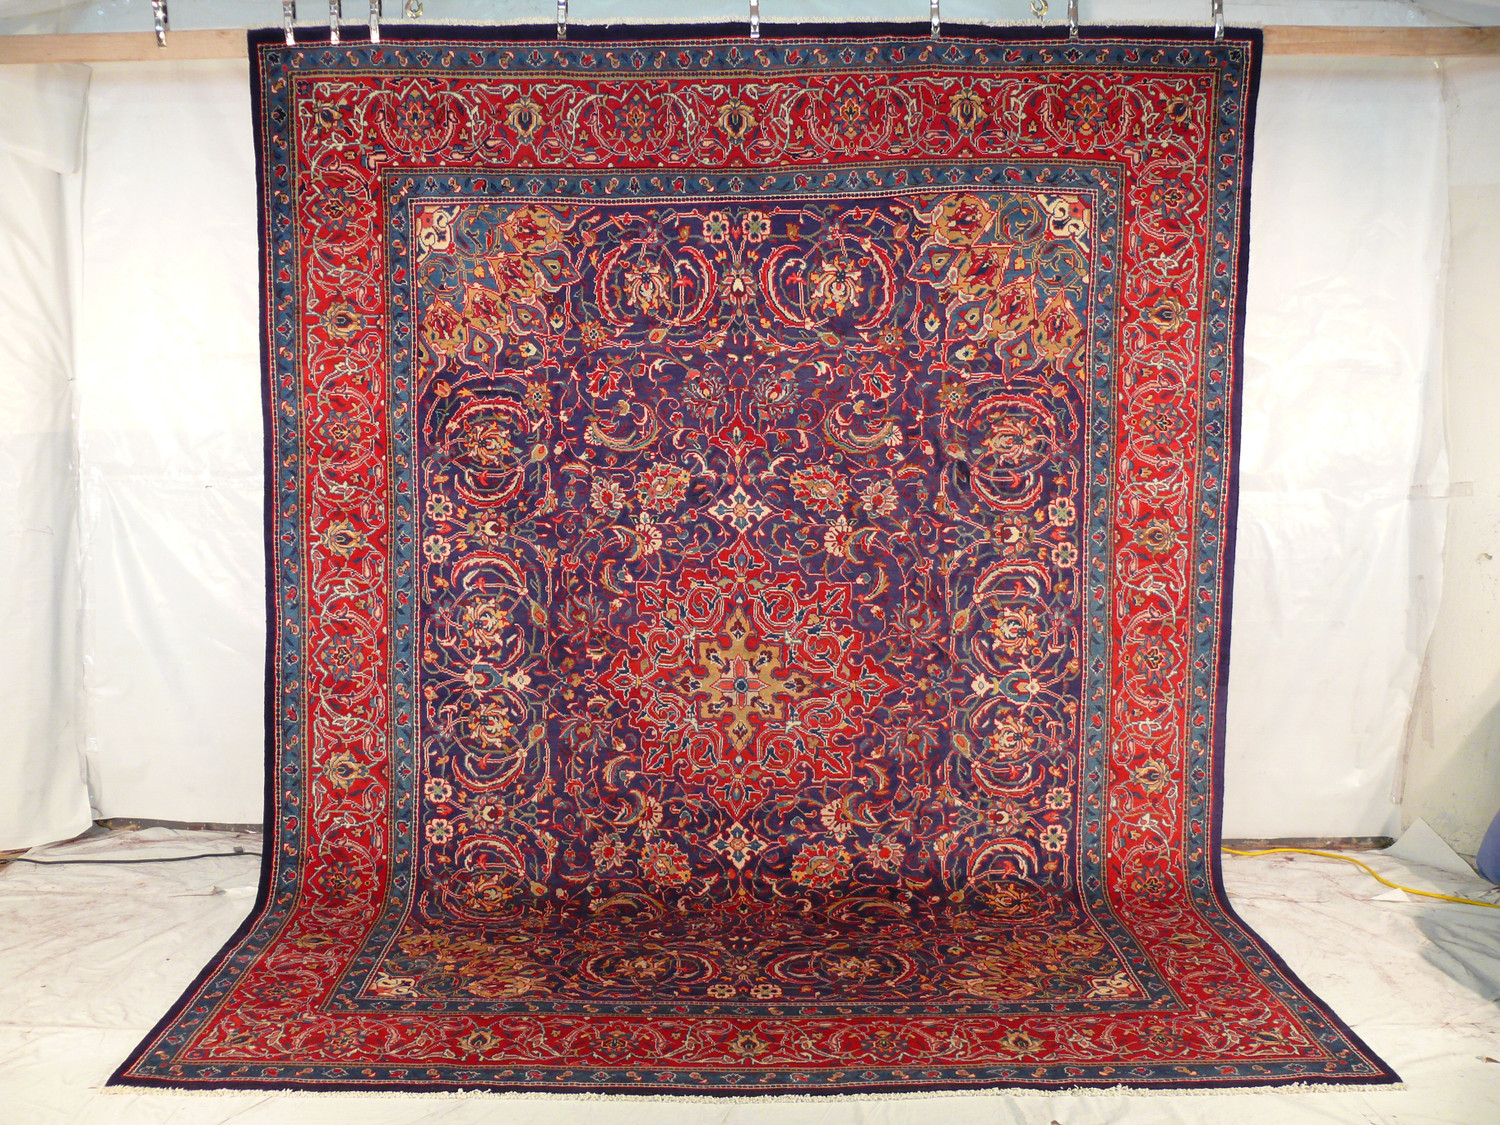 10x13 Persian Mahal Rug hand-knotted wool rug with intricate floral motifs